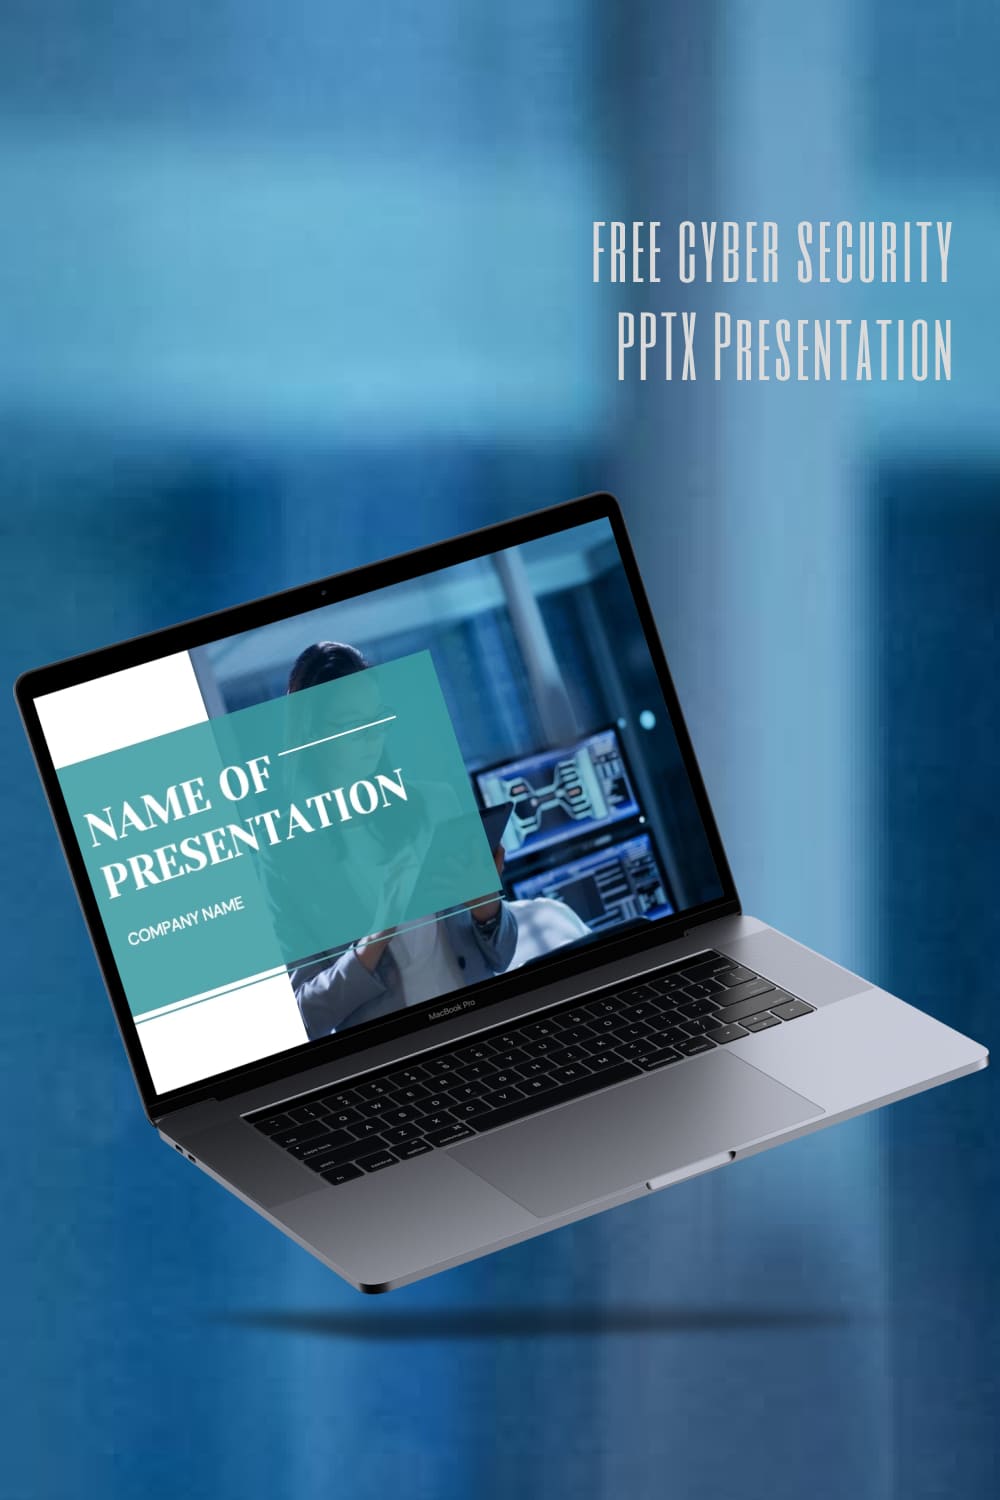 Free cyber security powerpoint template - pinterest image preview.